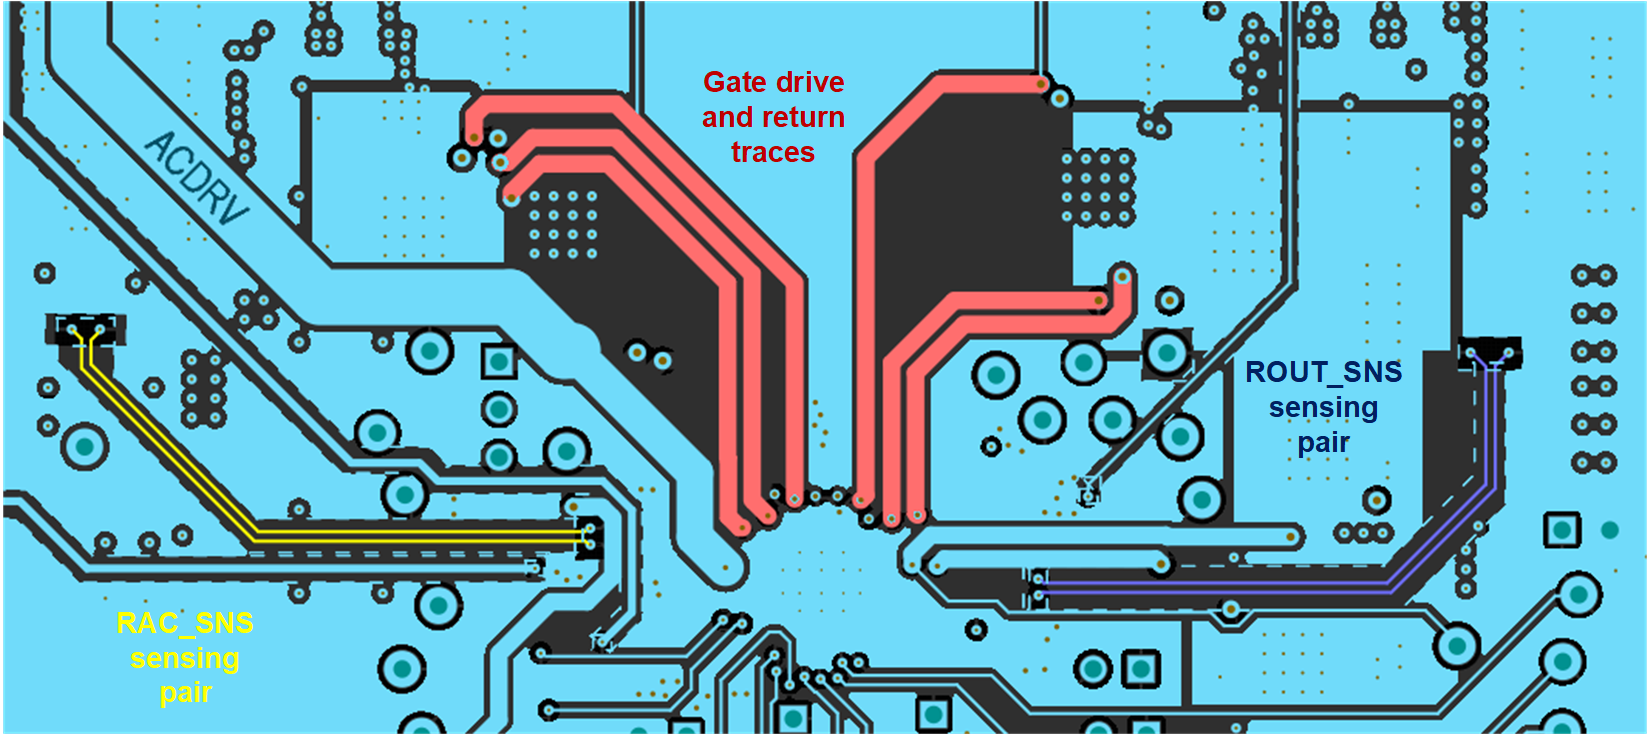 BQ25856-Q1 PCB Layout Gate Drive and Current Sensing Signal Layer Routing